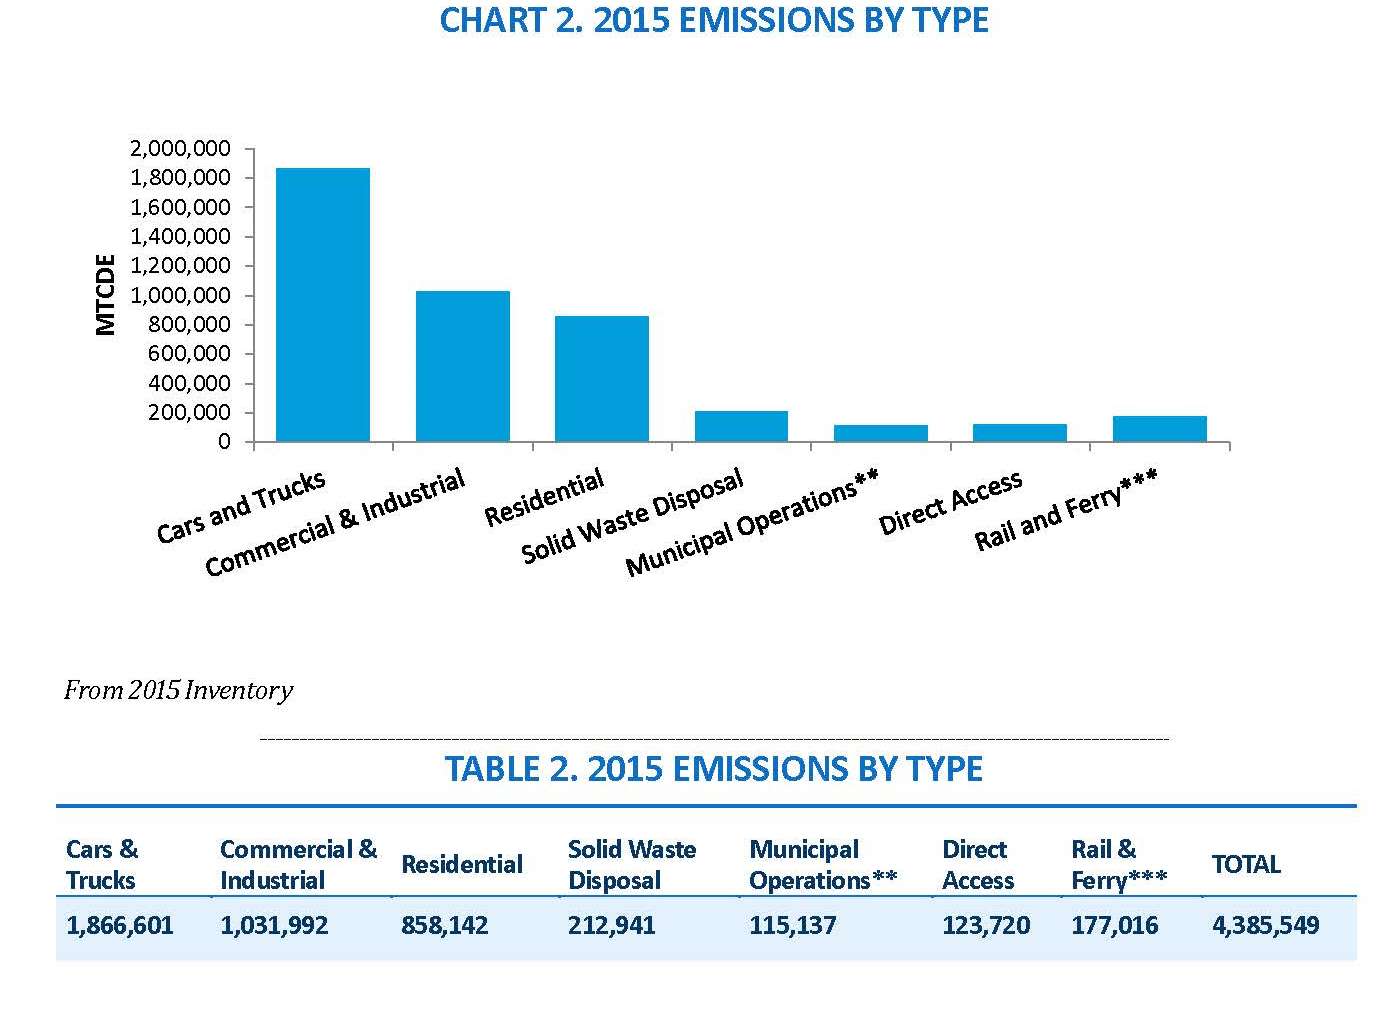 2015 Emissions Chart 2 by Type